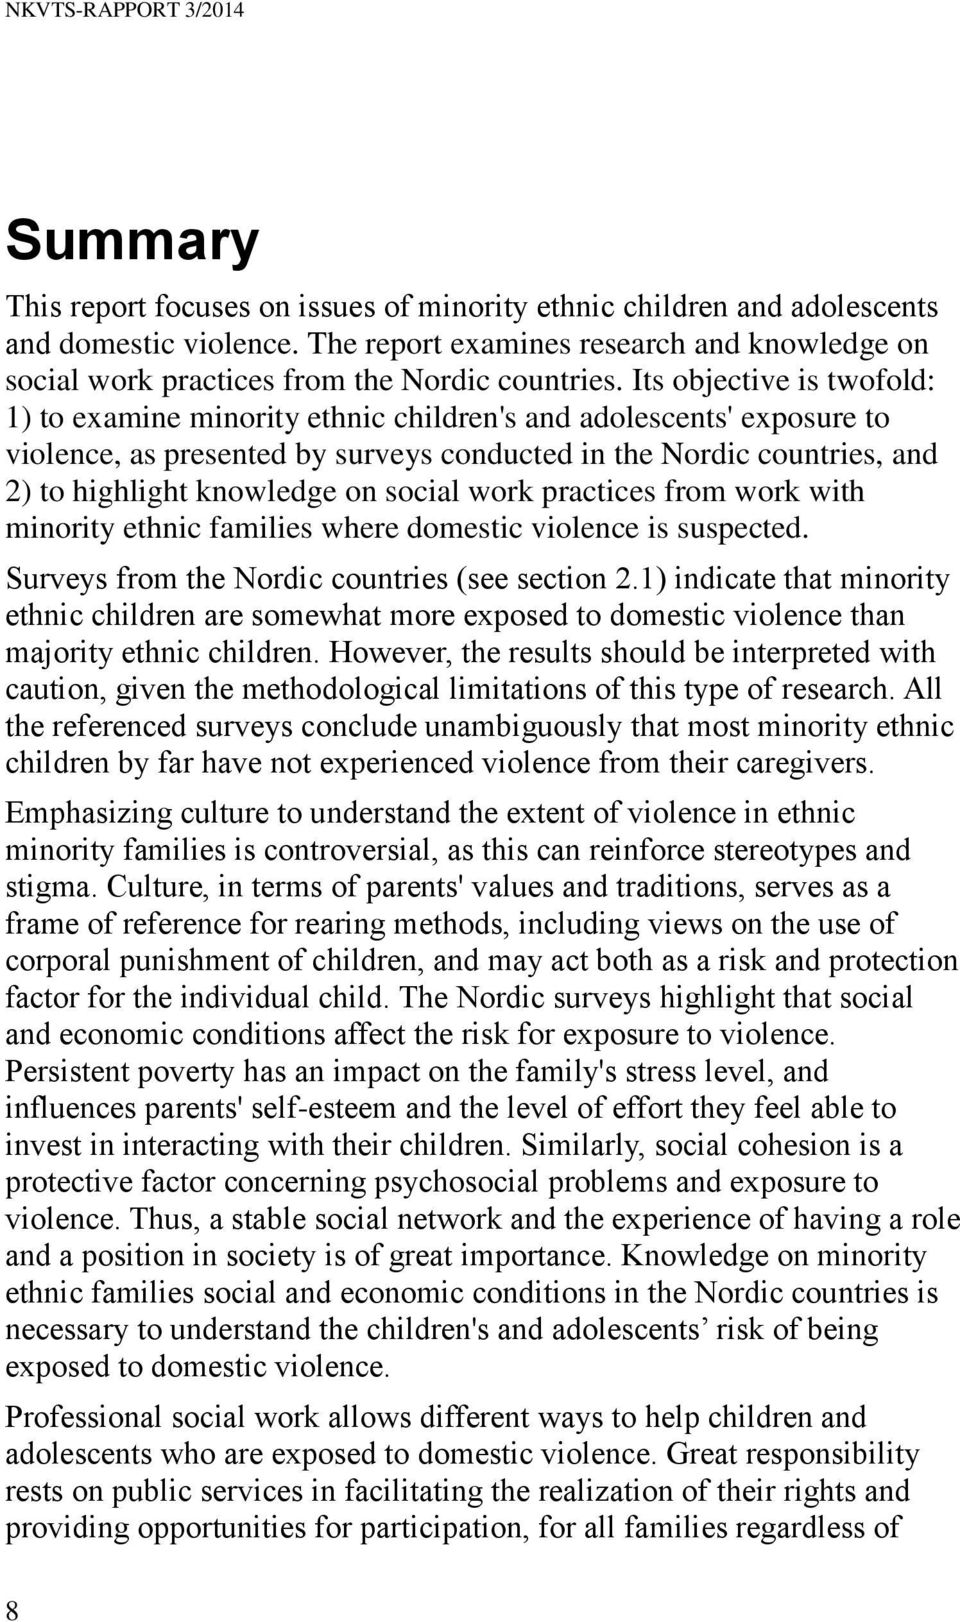 Its objective is twofold: 1) to examine minority ethnic children's and adolescents' exposure to violence, as presented by surveys conducted in the Nordic countries, and 2) to highlight knowledge on